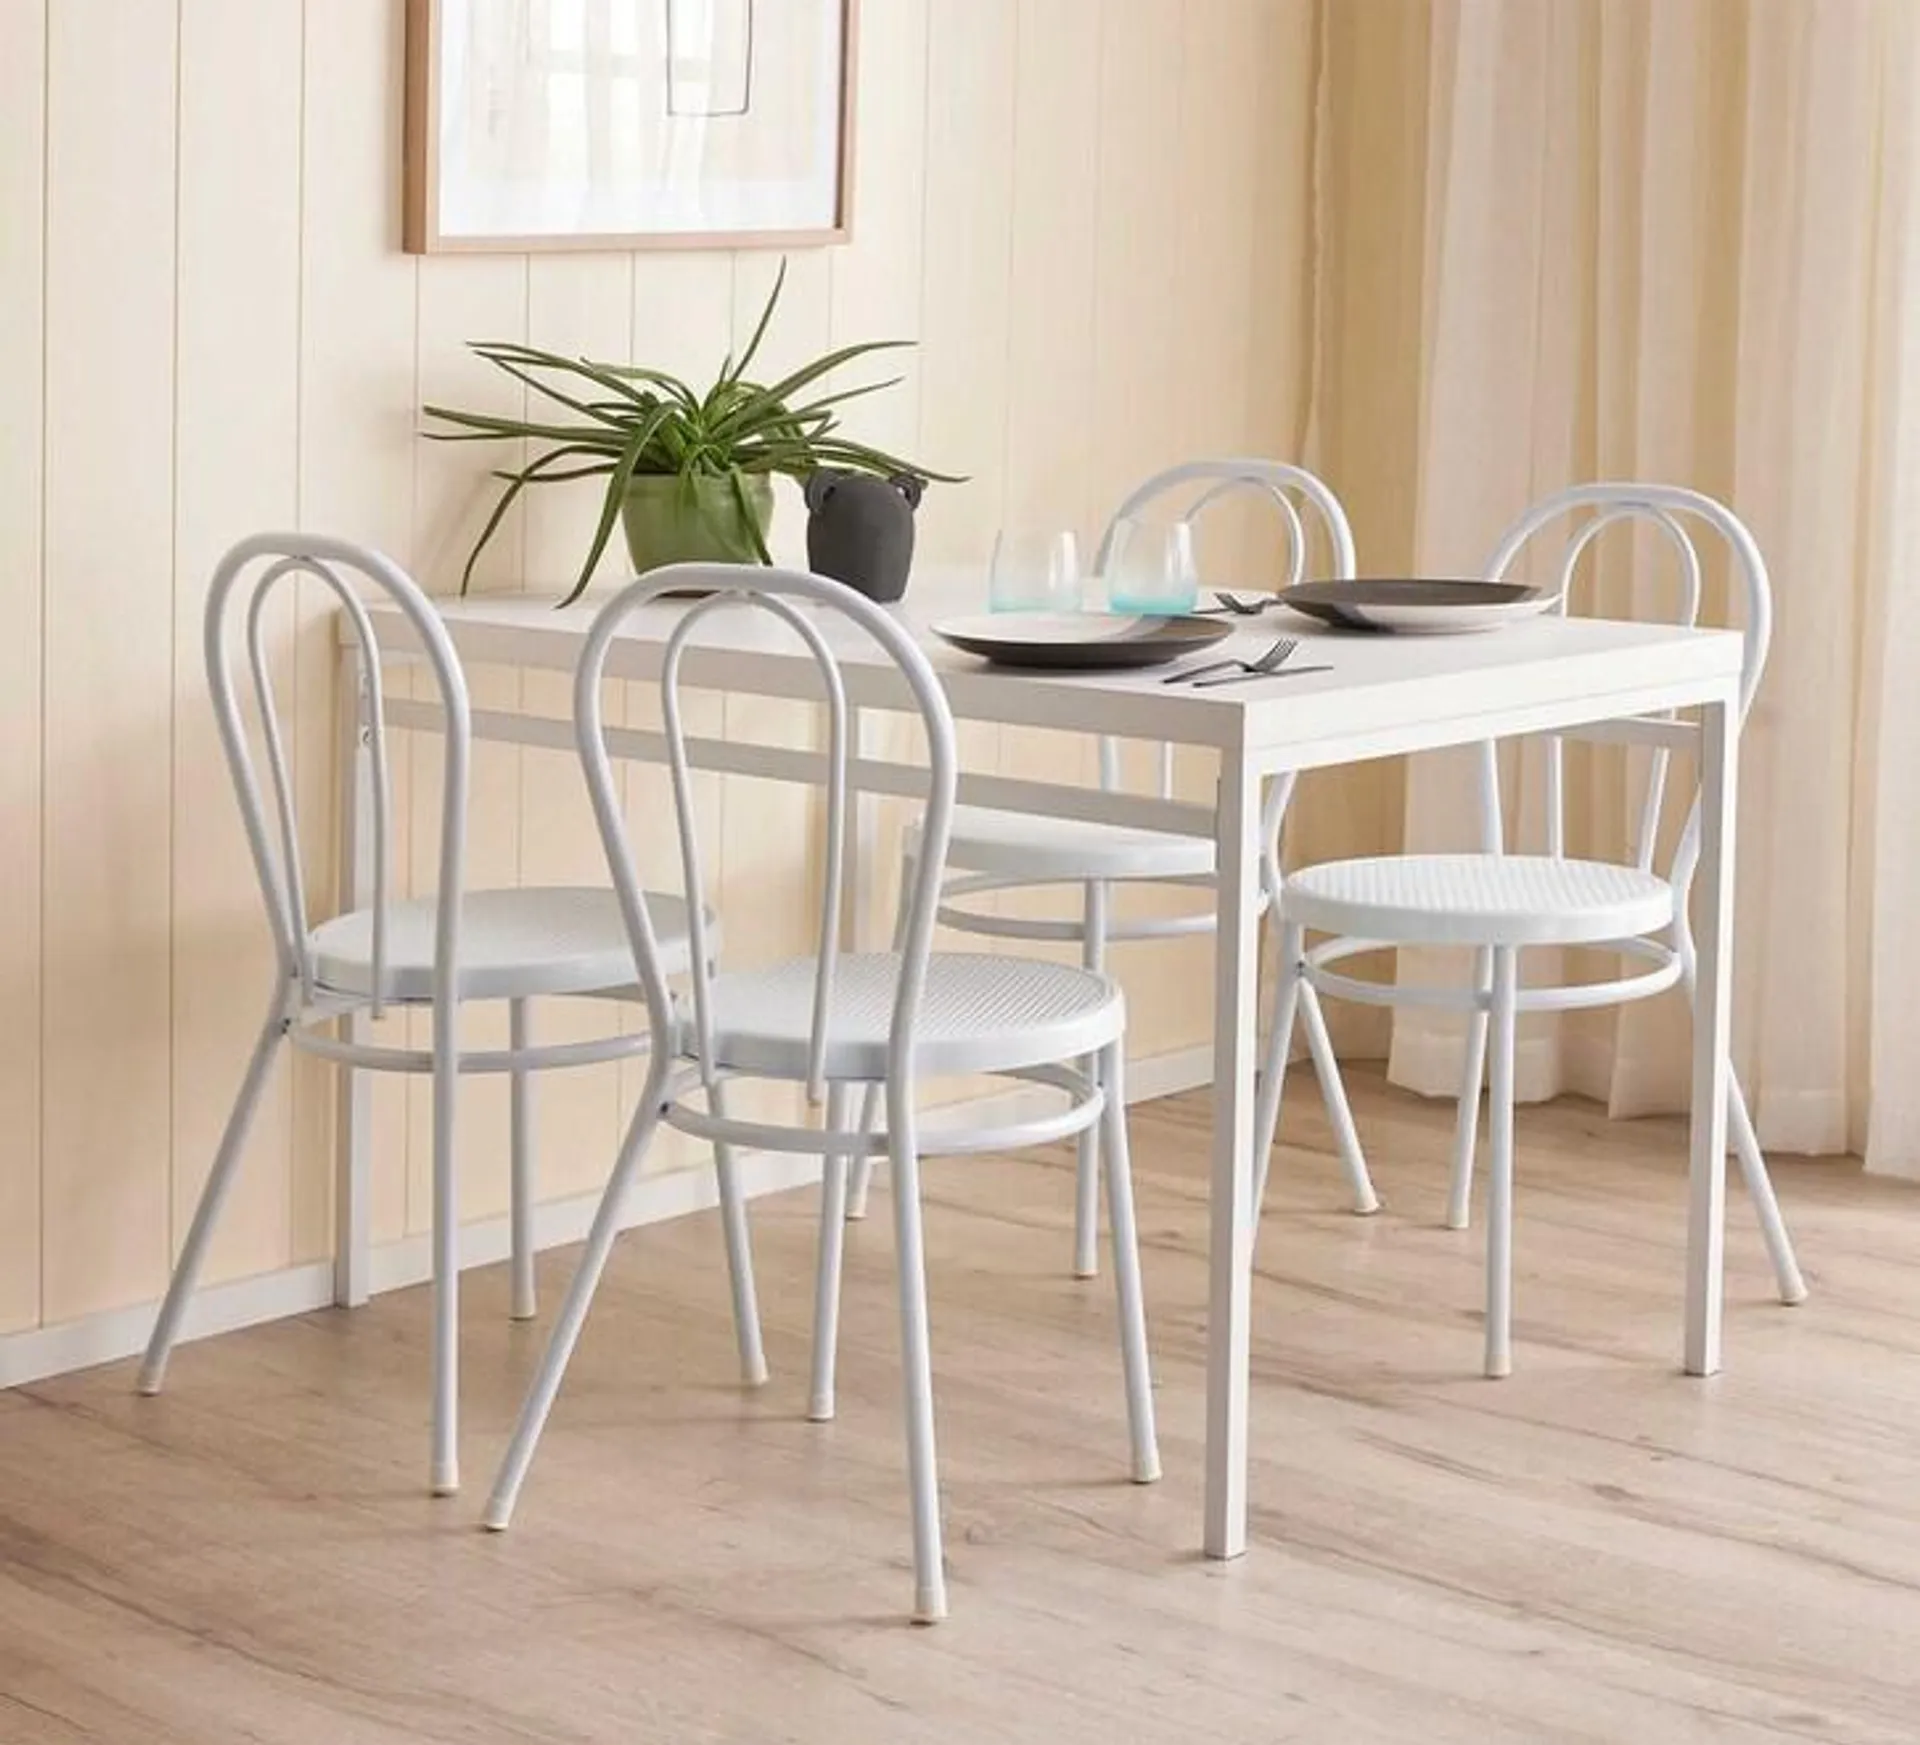 Oslo 4 Seater Dining Set with Province Chairs